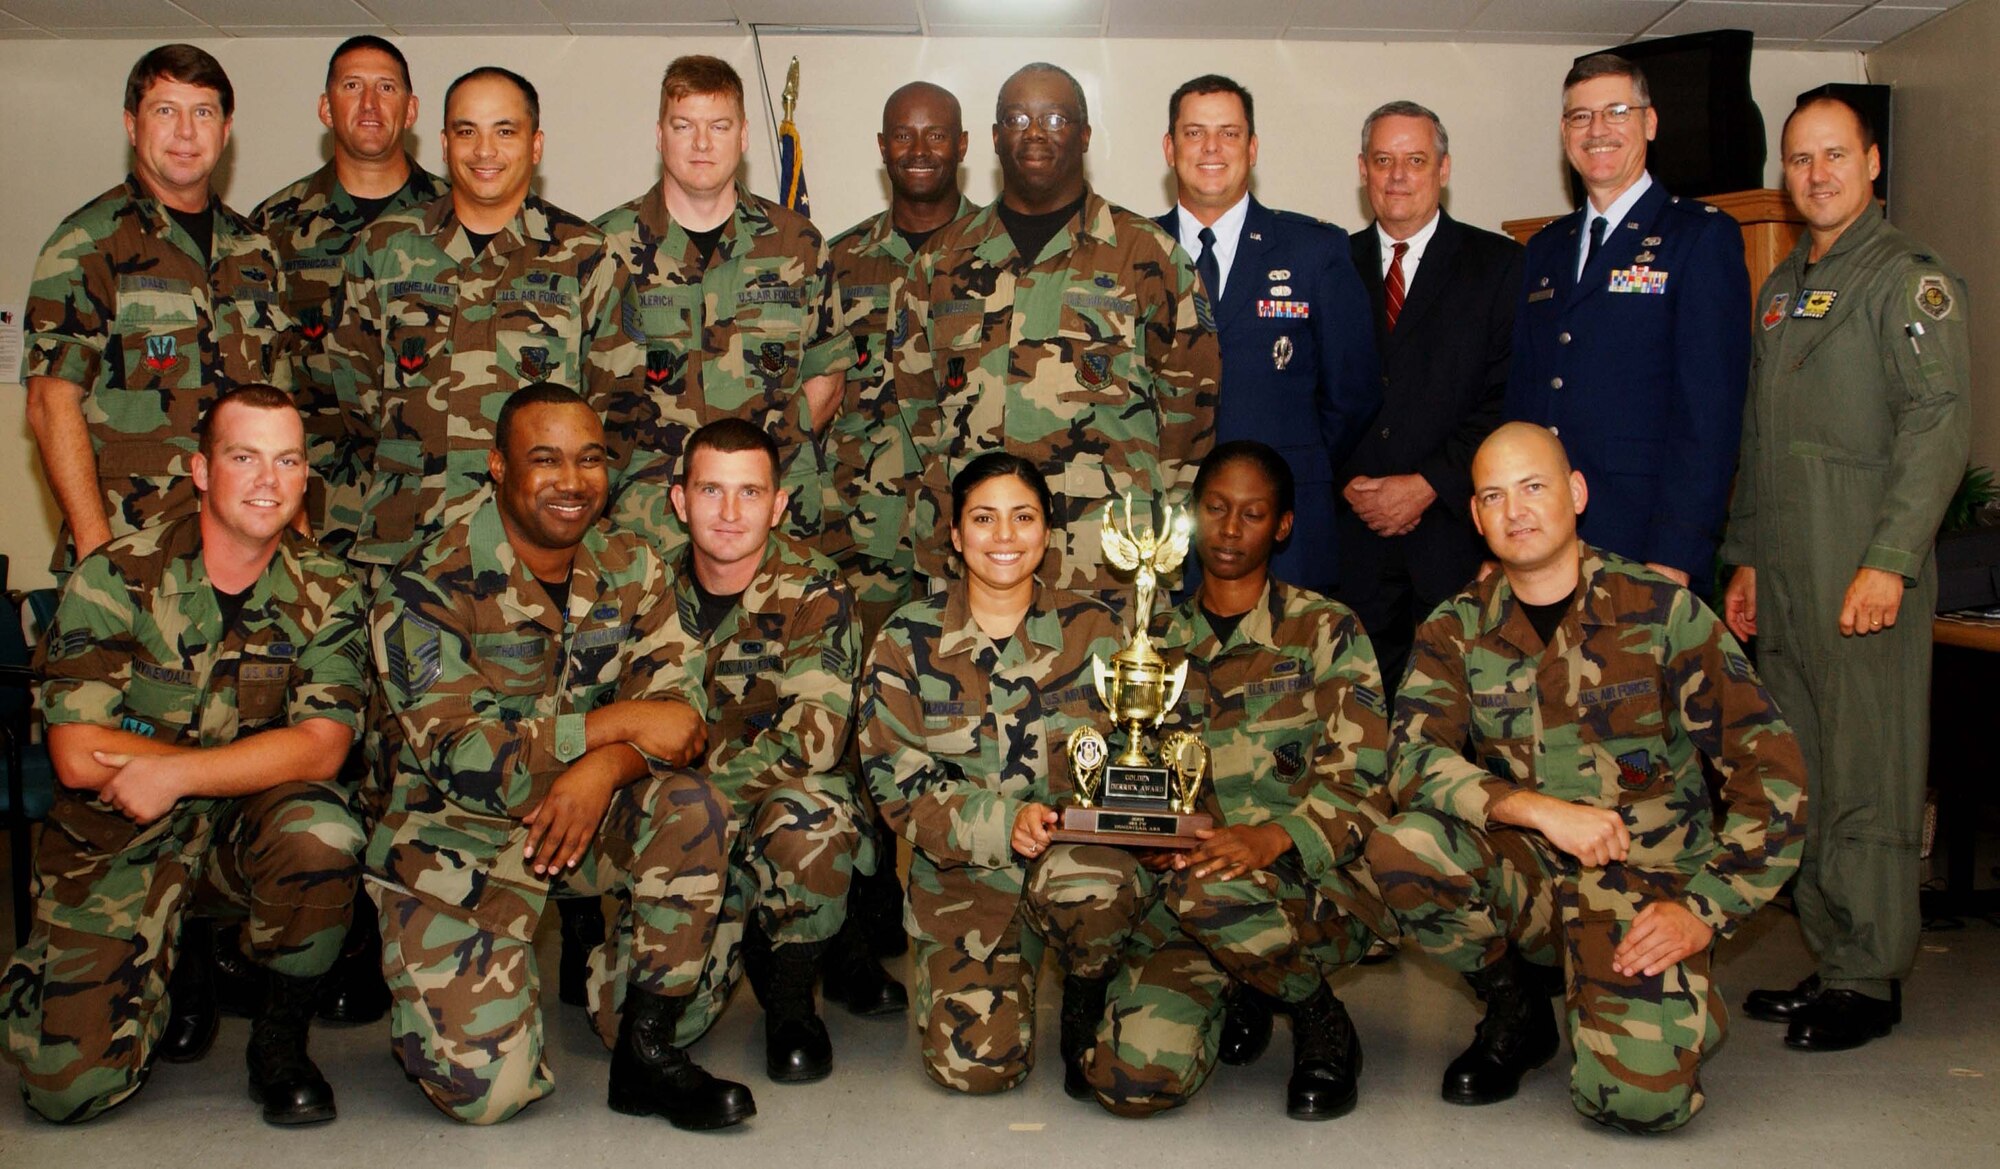 Members of the 482nd Logistics Readiness Squadron Fuels Flight pose proudly with their 2005 AFRC Golden Derrick Award. 482nd Fighter Wing Commander Col. Randy Falcon, right, LRS Commander Lt. Col. Chuck Mood, second to right, and MSG Commander Col. Dennis Daley, were on hand to thank the troops for all their hard work. (US Air Force Photo by Tech. Sgt. Paul Dean)